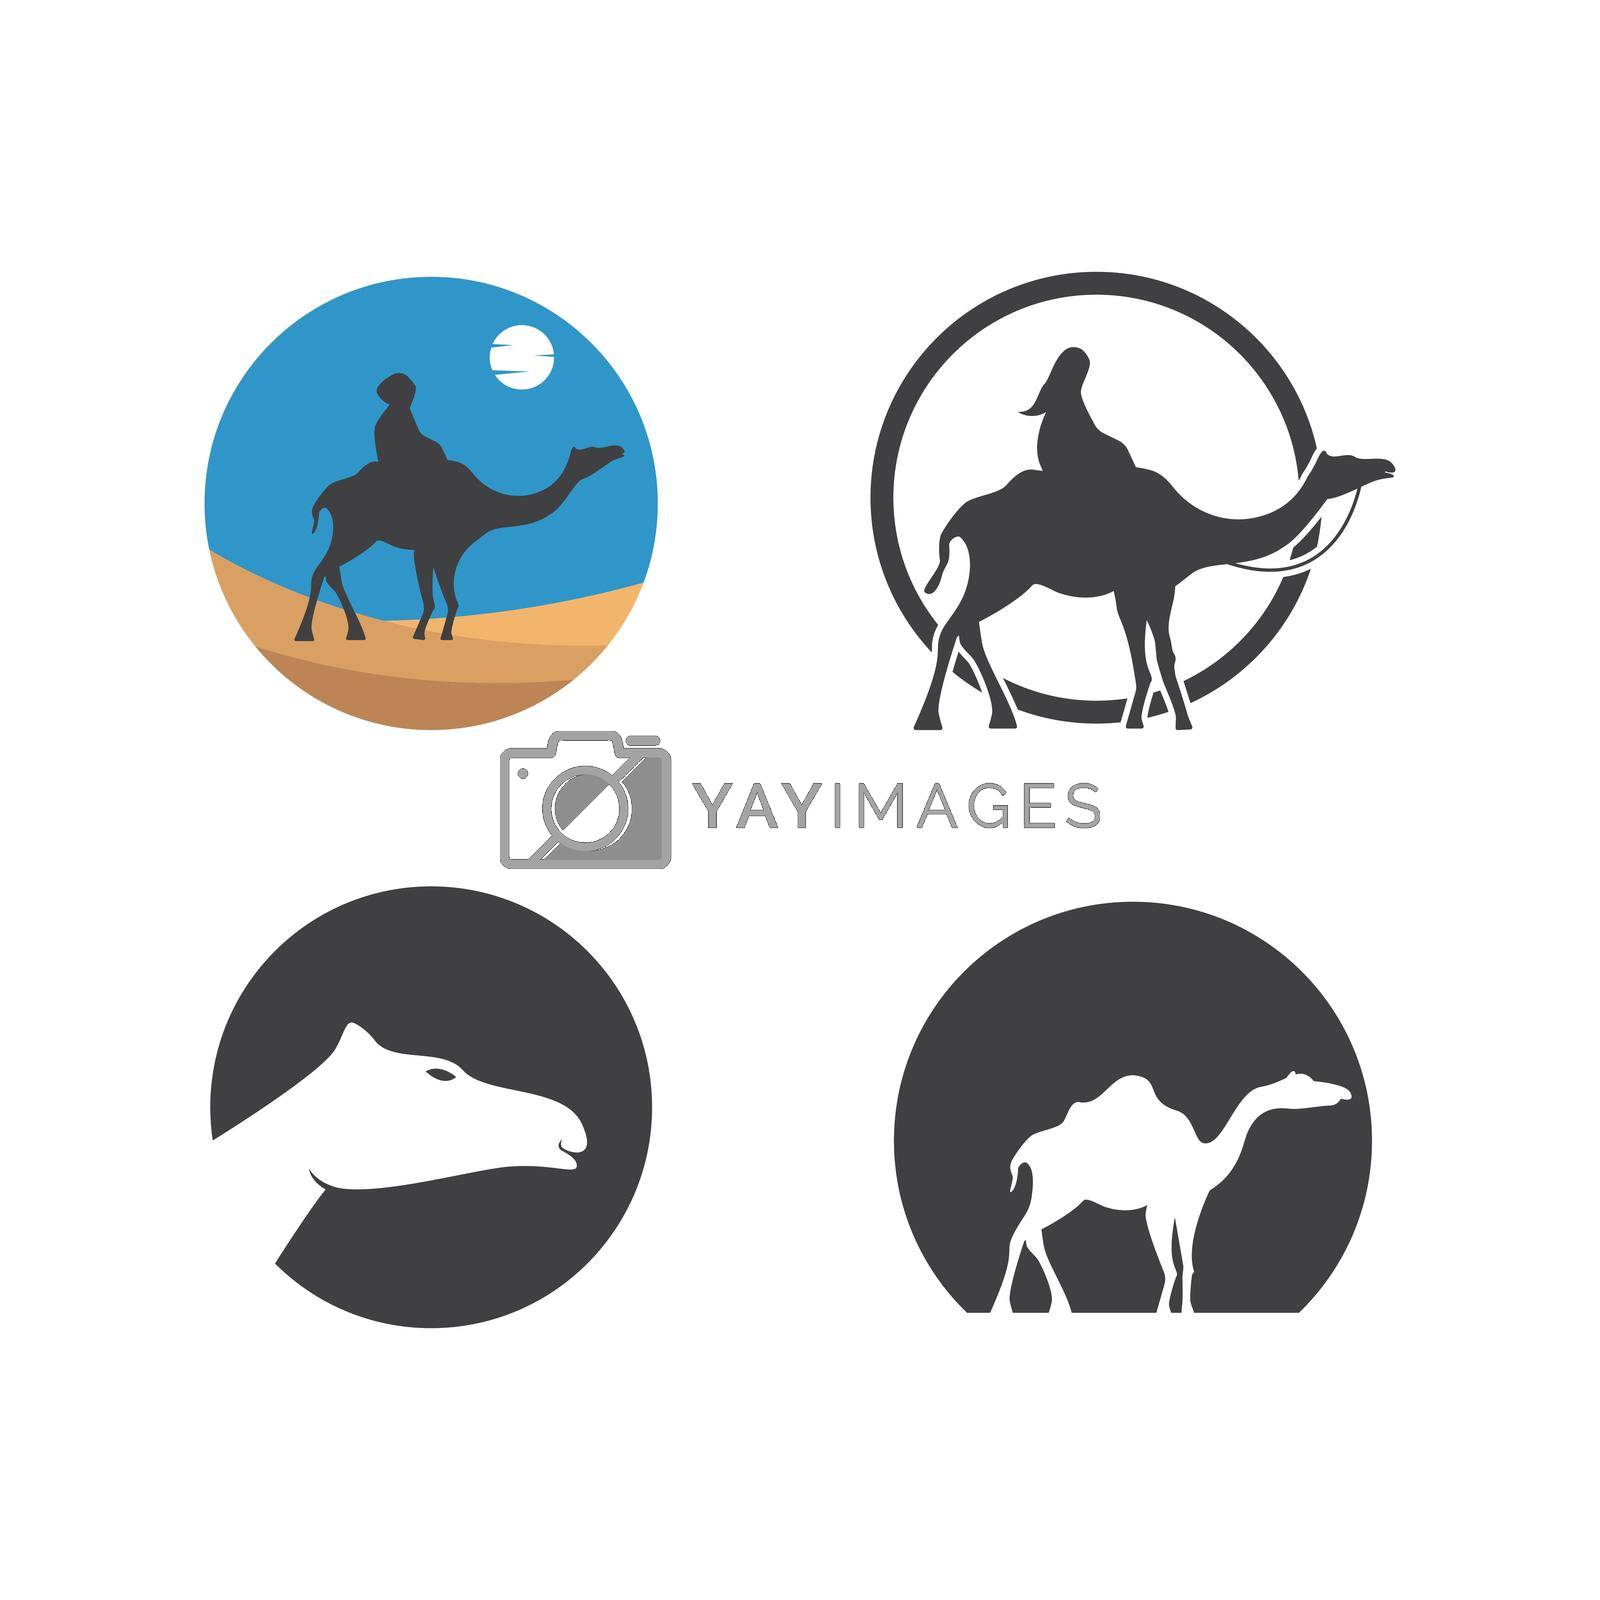 Royalty free image of Camel by awk